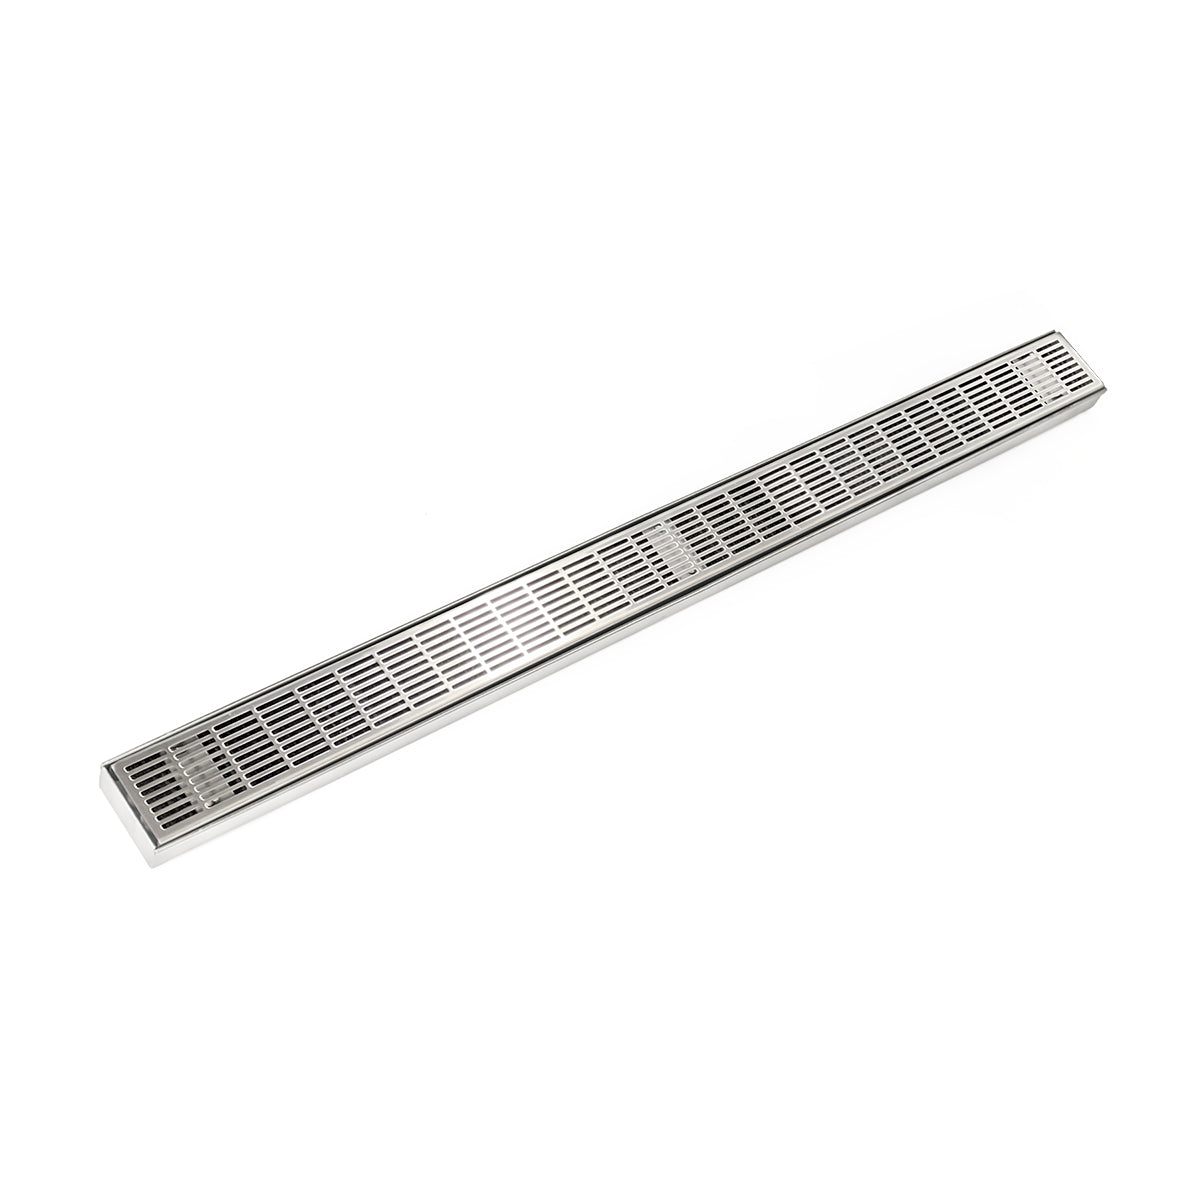 Infinity Drain 32" FX Series Fixed Length Linear Drain Kit with Perforated Slotted Grate